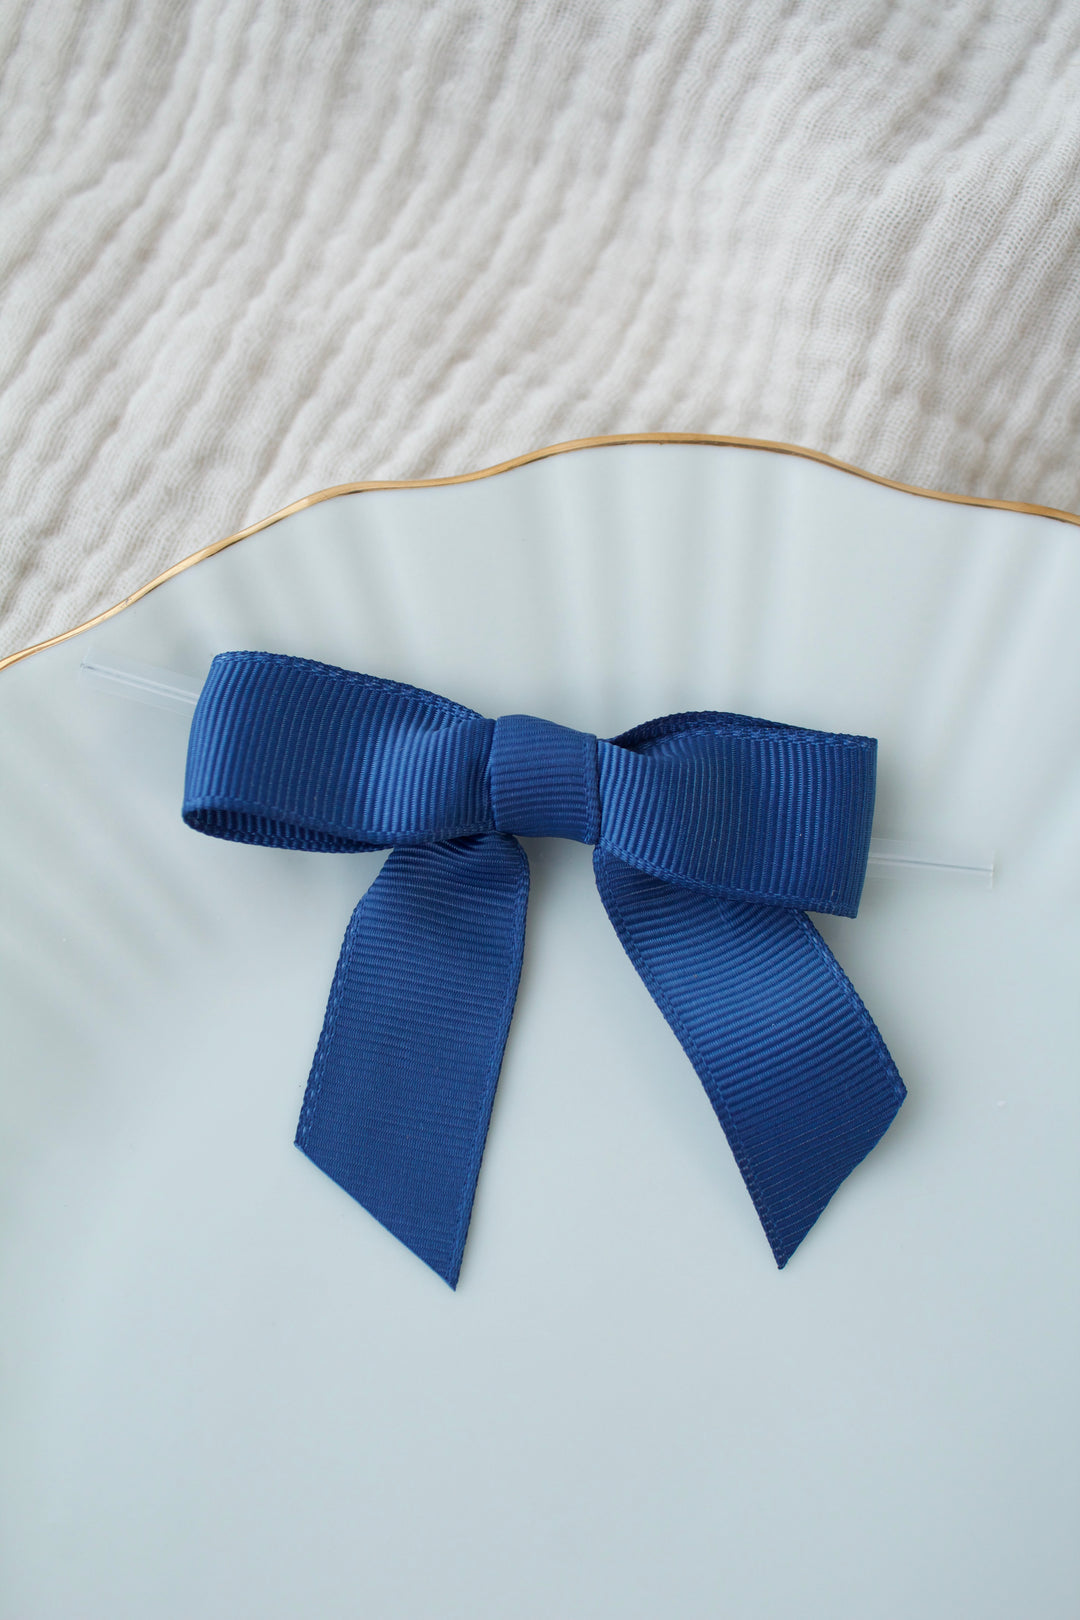 Navy blue - Grosgrains pre-tied bows (20pcs) with clear twist tie